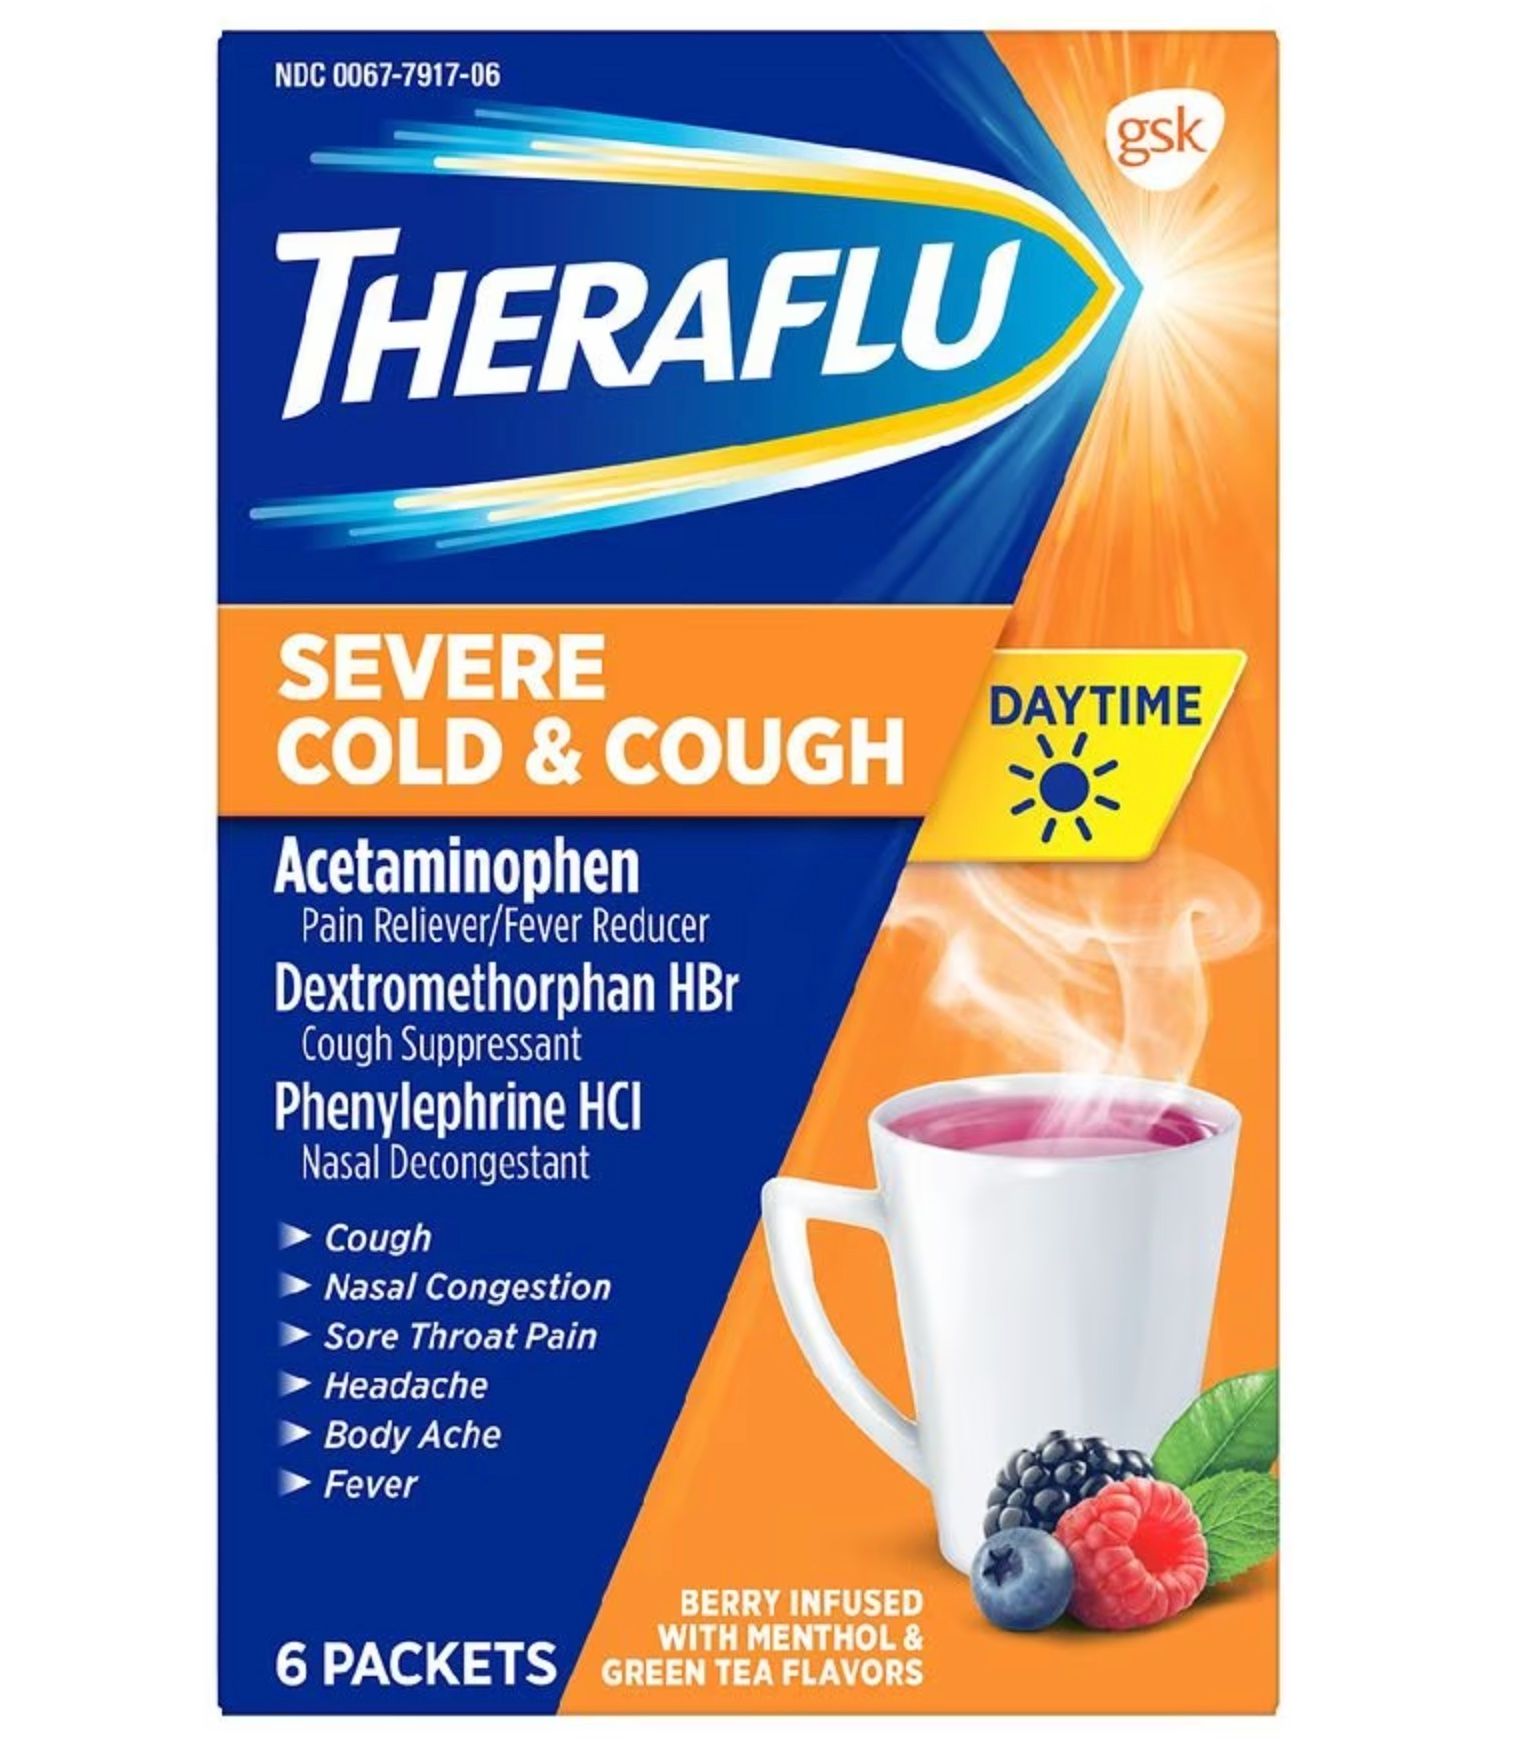 Theraflu Daytime Severe Cold & Cough Medicine, Berry - 6 packets